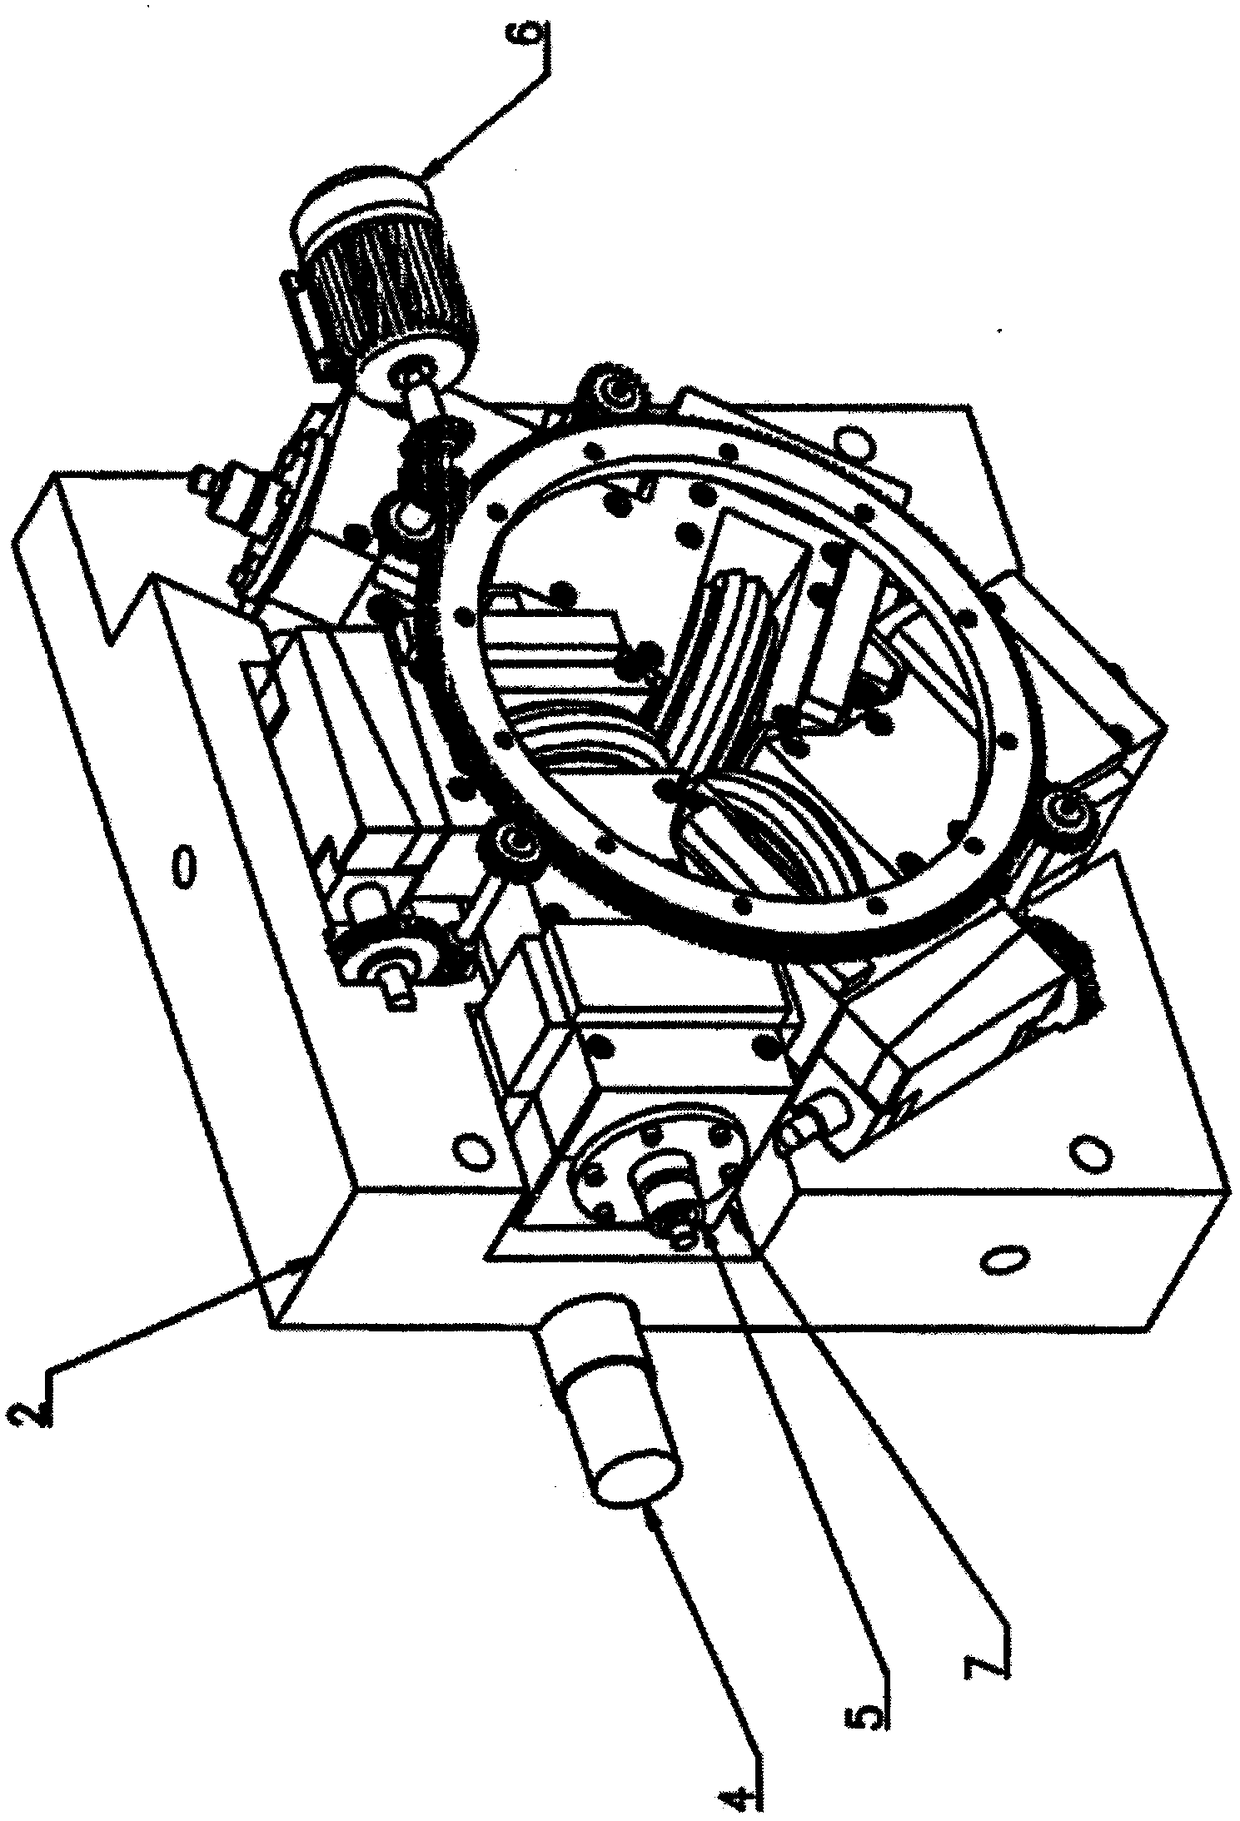 A two-stage lateral transmission three-roll rolling mill